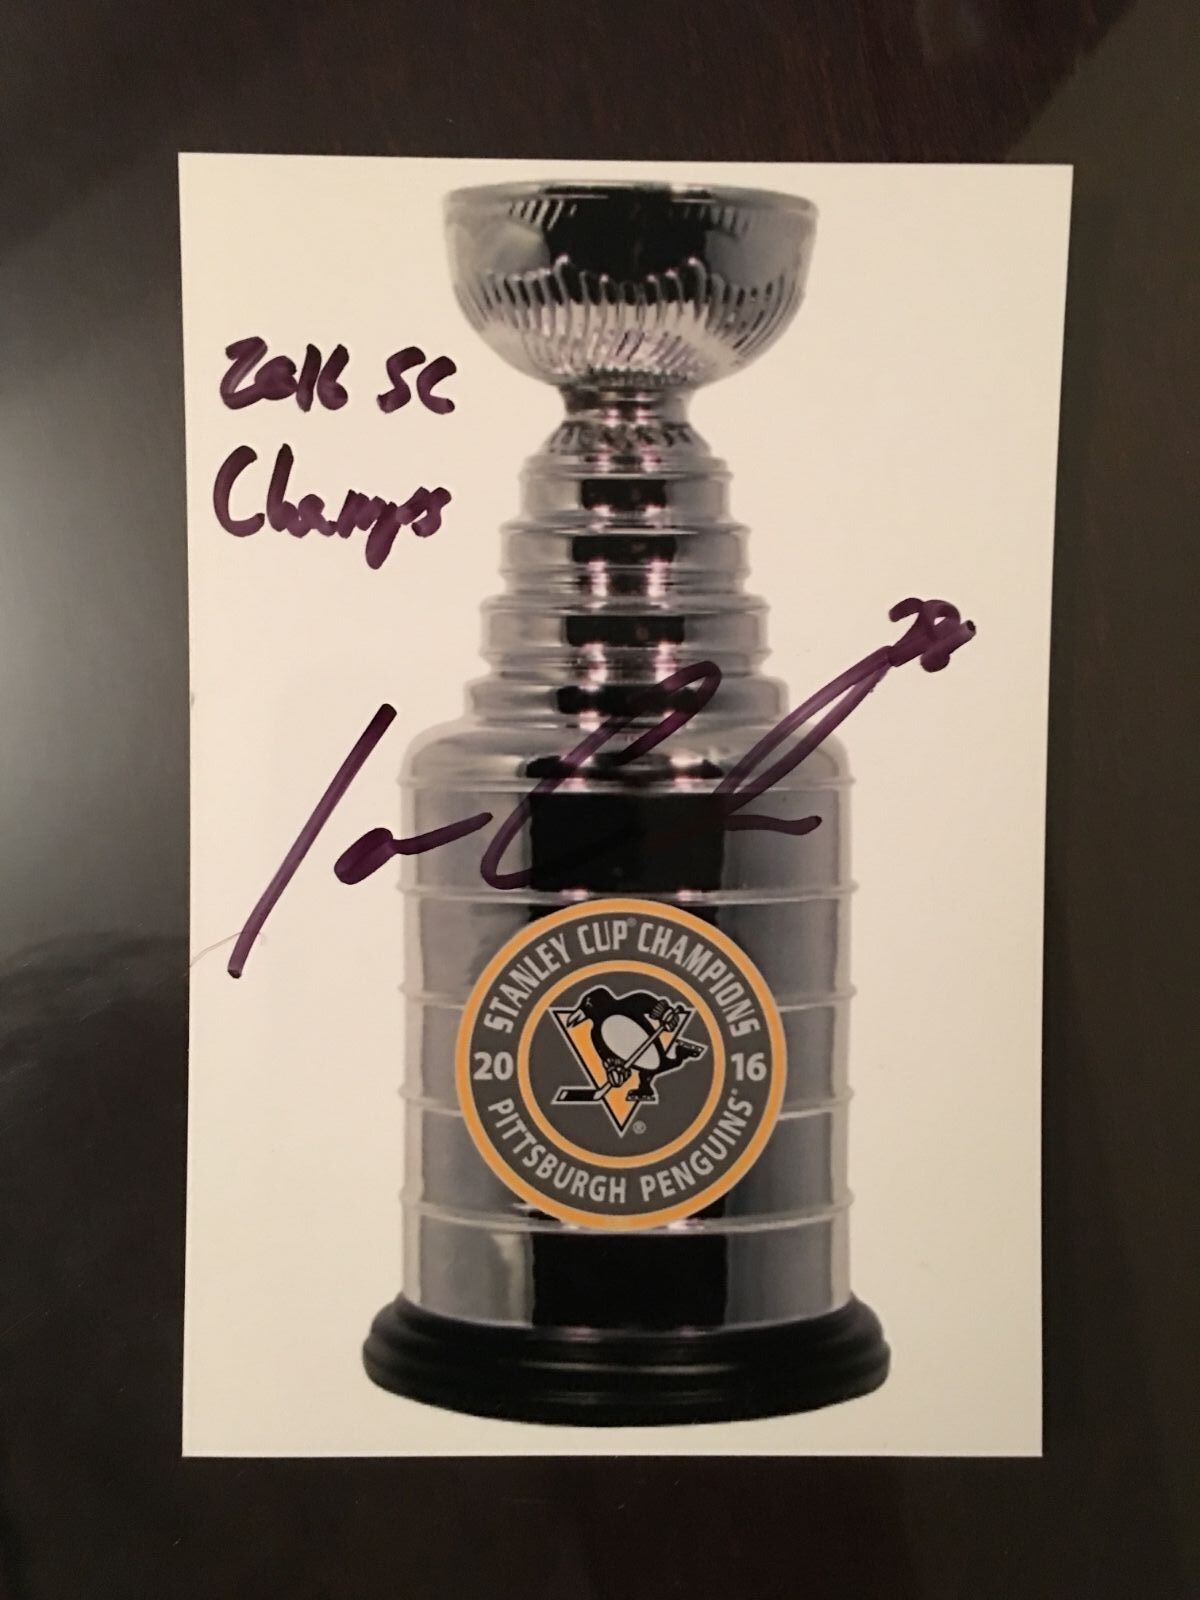 Ian Cole SIGNED 4x6 PHOTO PITTSBURGH PENGUINS Stanley Cup Champ AUTOGRAPH